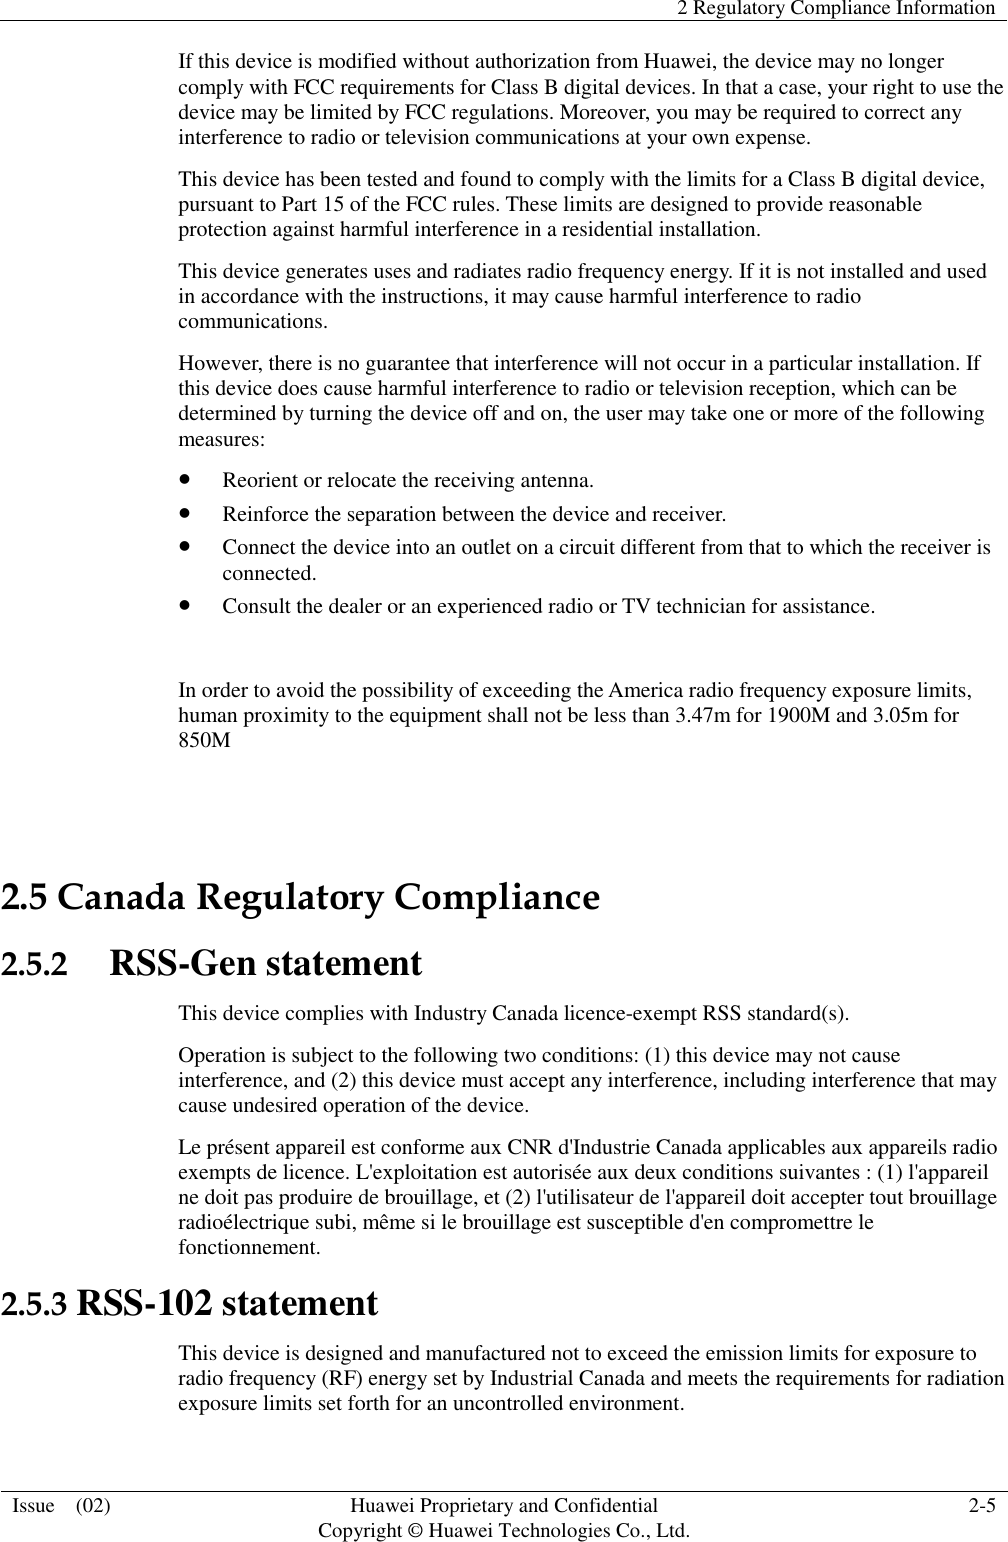   2 Regulatory Compliance Information  Issue    (02) Huawei Proprietary and Confidential                                     Copyright © Huawei Technologies Co., Ltd. 2-5  If this device is modified without authorization from Huawei, the device may no longer comply with FCC requirements for Class B digital devices. In that a case, your right to use the device may be limited by FCC regulations. Moreover, you may be required to correct any interference to radio or television communications at your own expense. This device has been tested and found to comply with the limits for a Class B digital device, pursuant to Part 15 of the FCC rules. These limits are designed to provide reasonable protection against harmful interference in a residential installation. This device generates uses and radiates radio frequency energy. If it is not installed and used in accordance with the instructions, it may cause harmful interference to radio communications. However, there is no guarantee that interference will not occur in a particular installation. If this device does cause harmful interference to radio or television reception, which can be determined by turning the device off and on, the user may take one or more of the following measures:  Reorient or relocate the receiving antenna.  Reinforce the separation between the device and receiver.  Connect the device into an outlet on a circuit different from that to which the receiver is connected.  Consult the dealer or an experienced radio or TV technician for assistance.             In order to avoid the possibility of exceeding the America radio frequency exposure limits, human proximity to the equipment shall not be less than 3.47m for 1900M and 3.05m for 850M  2.5 Canada Regulatory Compliance 2.5.2   RSS-Gen statement This device complies with Industry Canada licence-exempt RSS standard(s). Operation is subject to the following two conditions: (1) this device may not cause interference, and (2) this device must accept any interference, including interference that may cause undesired operation of the device. Le présent appareil est conforme aux CNR d&apos;Industrie Canada applicables aux appareils radio exempts de licence. L&apos;exploitation est autorisée aux deux conditions suivantes : (1) l&apos;appareil ne doit pas produire de brouillage, et (2) l&apos;utilisateur de l&apos;appareil doit accepter tout brouillage radioélectrique subi, même si le brouillage est susceptible d&apos;en compromettre le fonctionnement. 2.5.3 RSS-102 statement This device is designed and manufactured not to exceed the emission limits for exposure to radio frequency (RF) energy set by Industrial Canada and meets the requirements for radiation exposure limits set forth for an uncontrolled environment. 